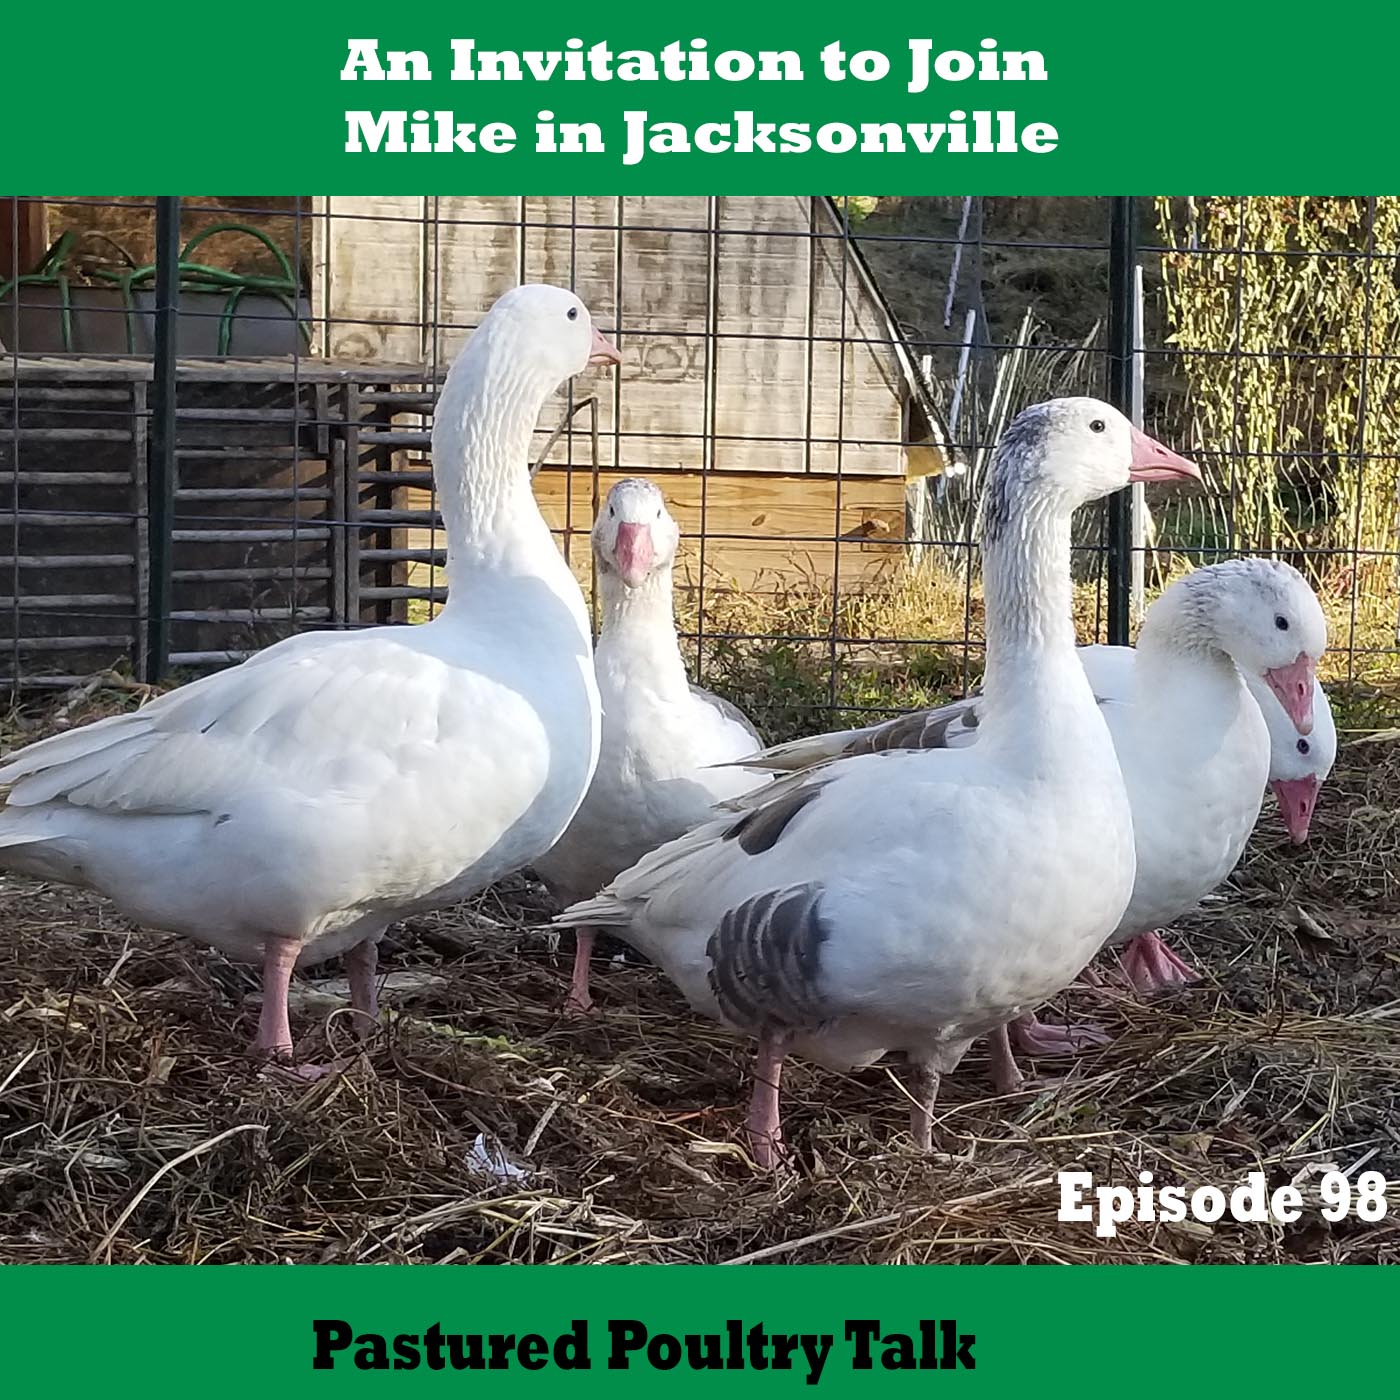 pastured poultry talk 98